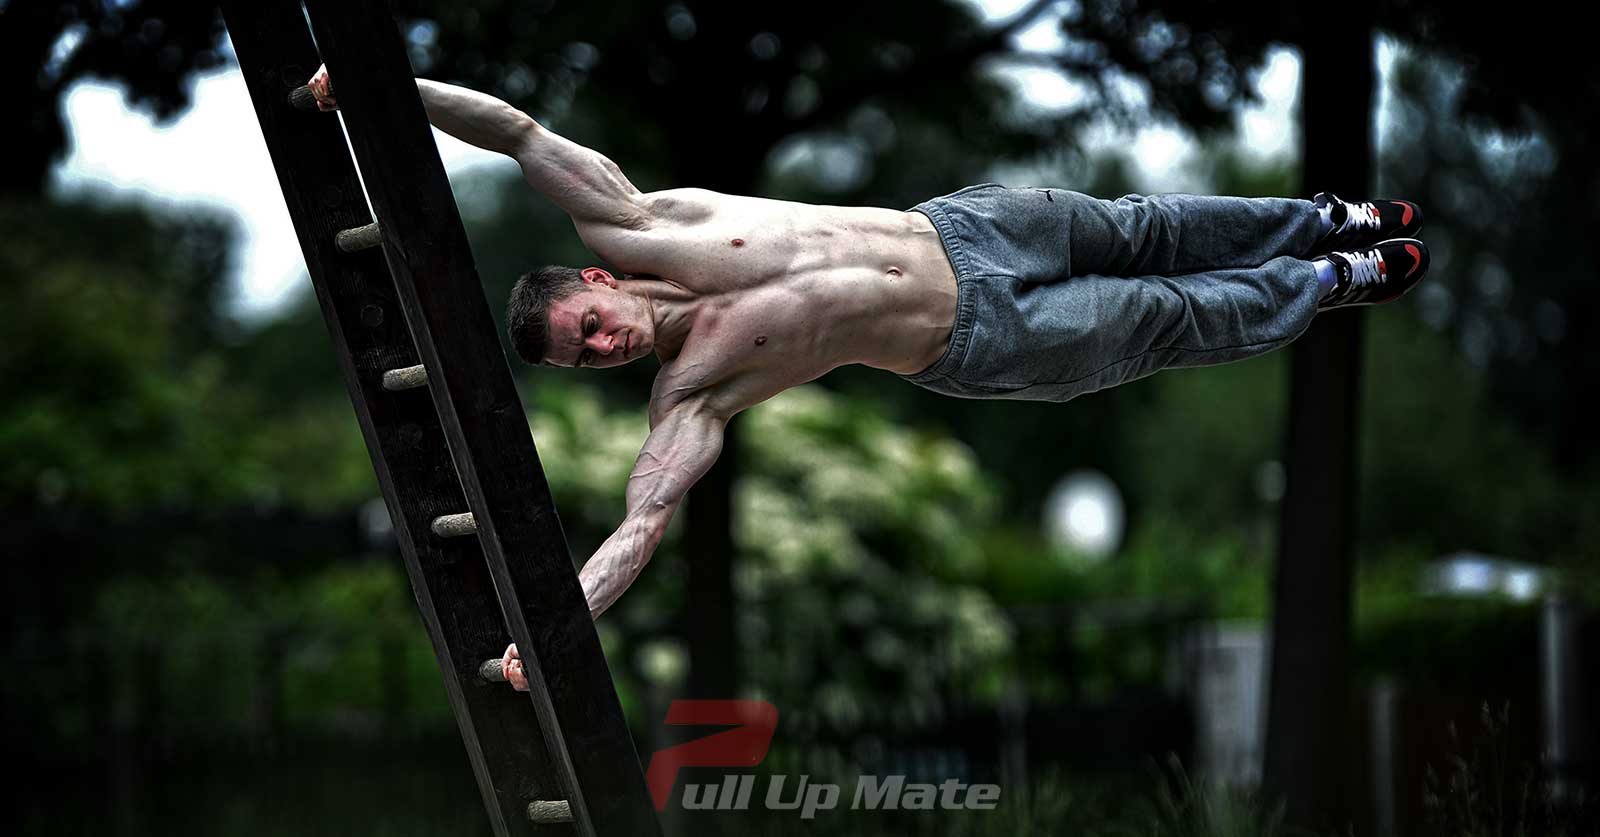 Calisthenics: Complete Step by Step Workout Guide to Build Strength  (Accelerated Beginner's Guide to Calisthenics and Strength)